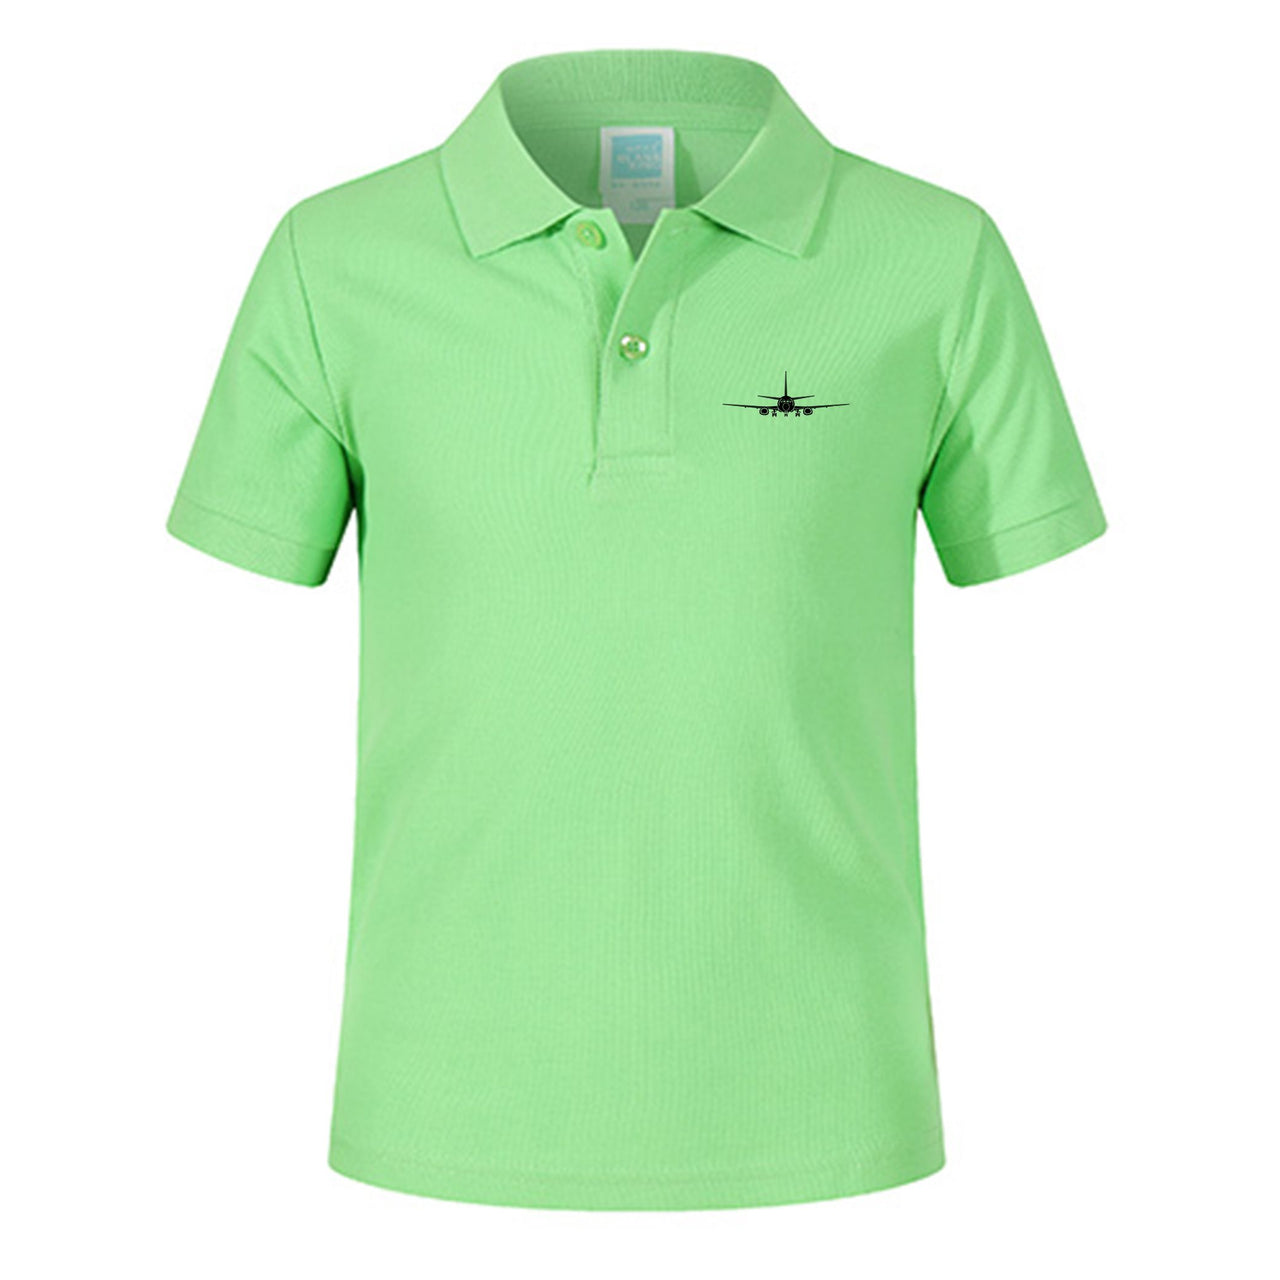 Boeing 737 Silhouette Designed Children Polo T-Shirts